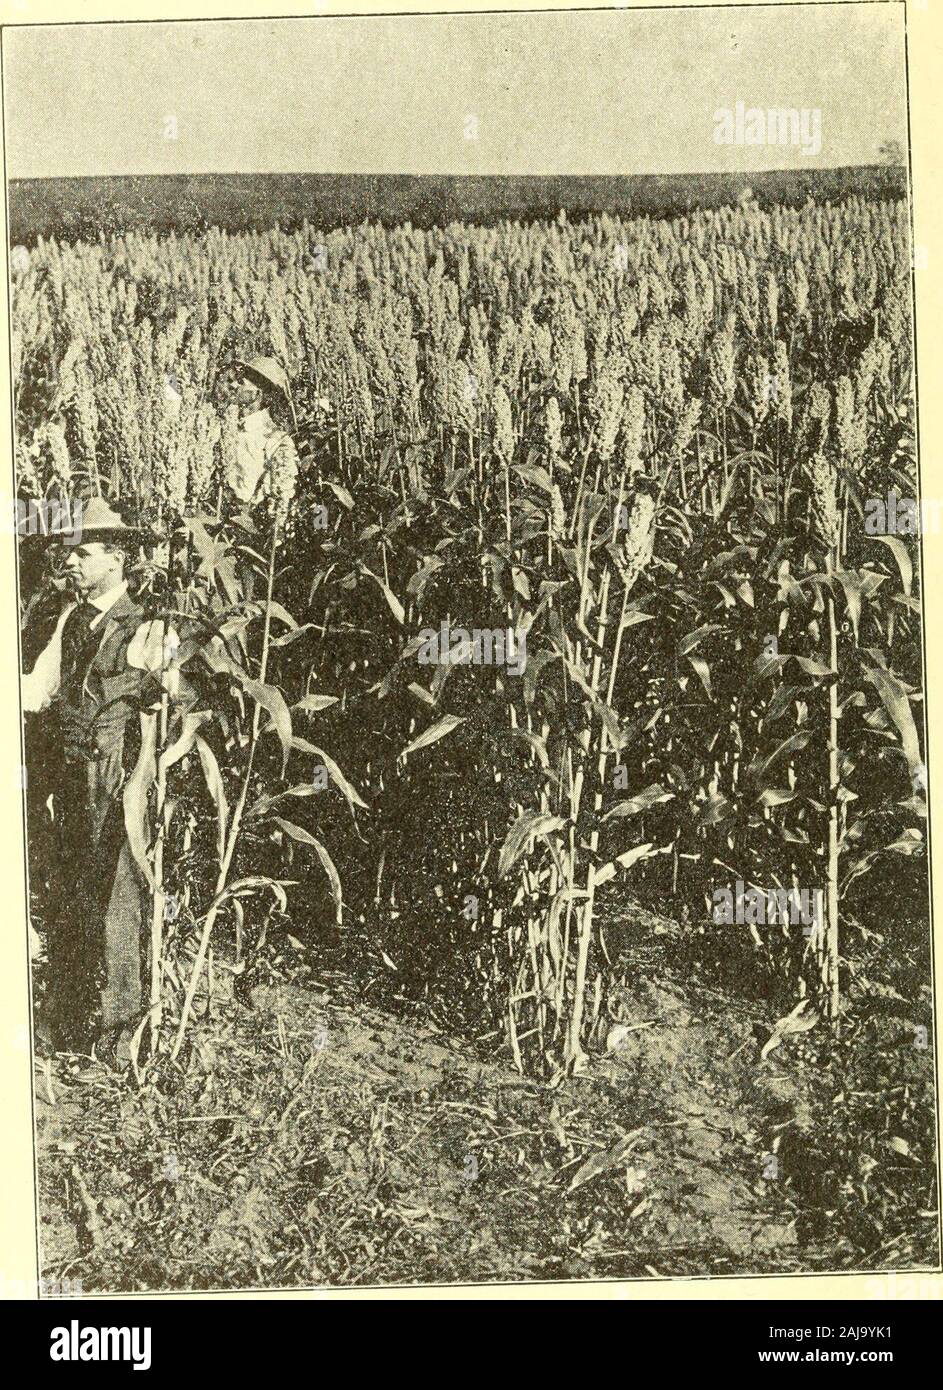 Forage crops for soiling, silage, hay and pasture . rms, the i^lantsusually known as sorghum among farmers; (2)the non-saccharine fodder sorghums; (3) broom-corn (wholly distinct from the broom-corn milletdescribed in the last chapter). All these varioussorghums are considered to be forms of one vari-able species, Sorglimn vulgare or Andropogon Sor-ghum, native to the Old World. The non-saccharine fodder sorghums include allthe douras (spelled also dlioura and durra), Egypt-tian corn, milo maize, kafir corn. There is no onename that is now used to designate this group,but kafir corn is now bes Stock Photo